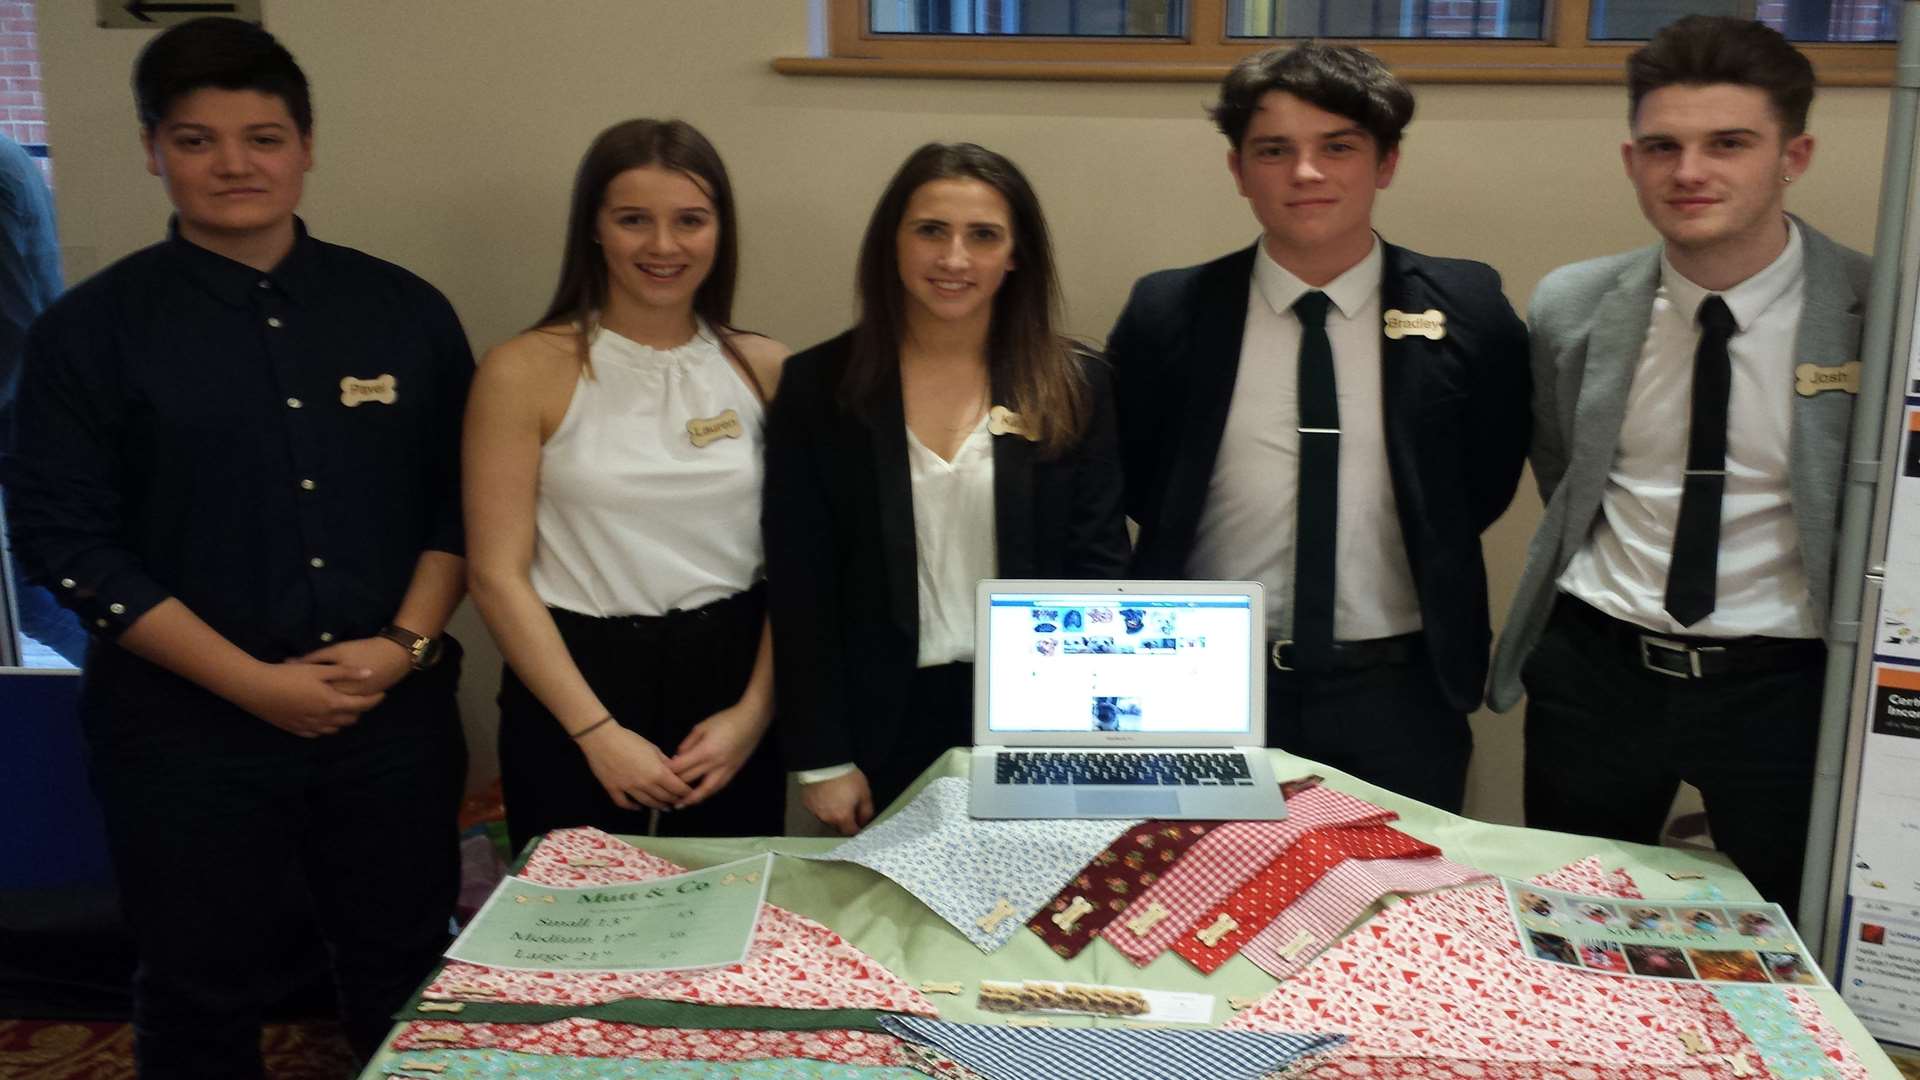 Mutt & Co, which sells pet bandanas and is run by sixth formers at the Thomas Aveling School in Rochester, were among the firms to make the Young Enterprise Kent & Medway final